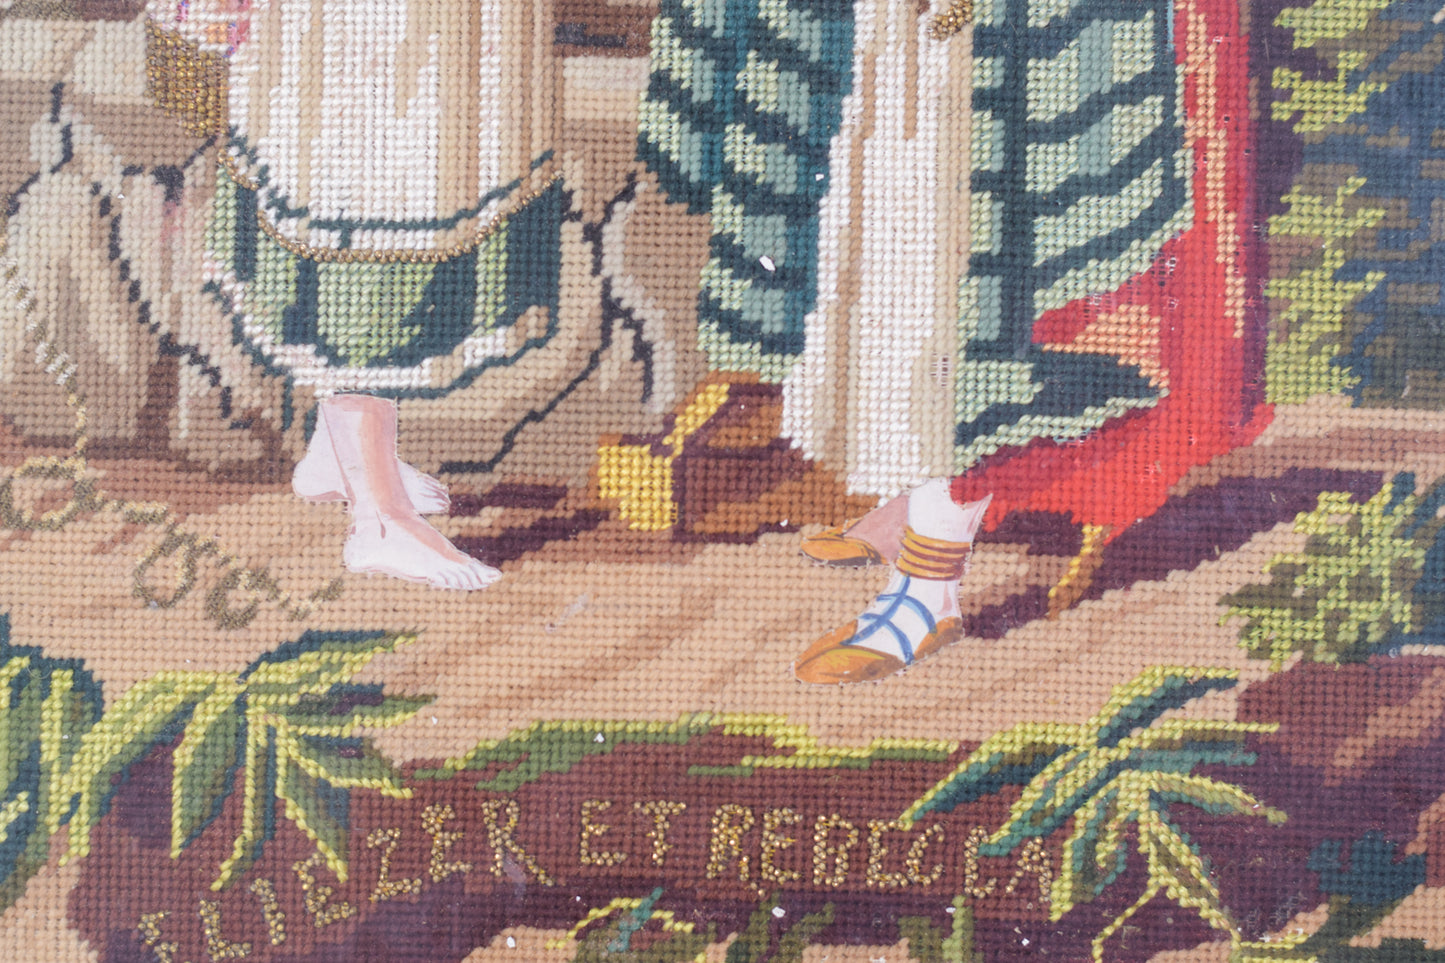 Framed embroidery 'Rebecca and Elezier at the Well'_Title